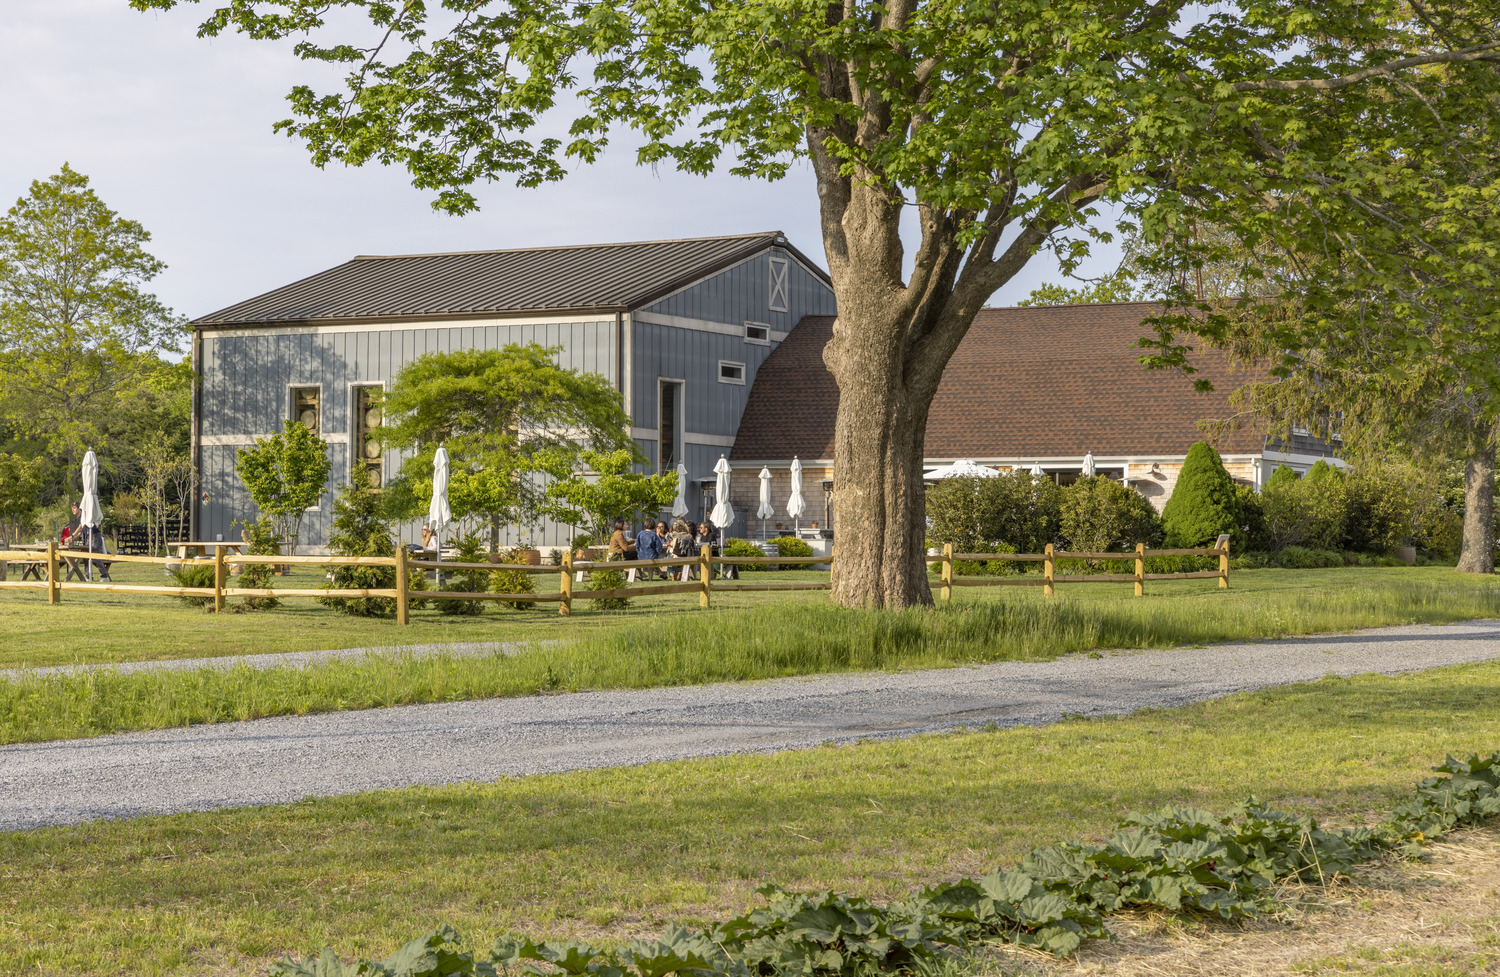 Sagaponack Farm Distillery hosts The Express Magazine's Sips of Summer event “Craft Spirits from Master Distillers” on July 27. JOHN MUSNICKI/@ MUSNICKI_PHOTOGRAPHY